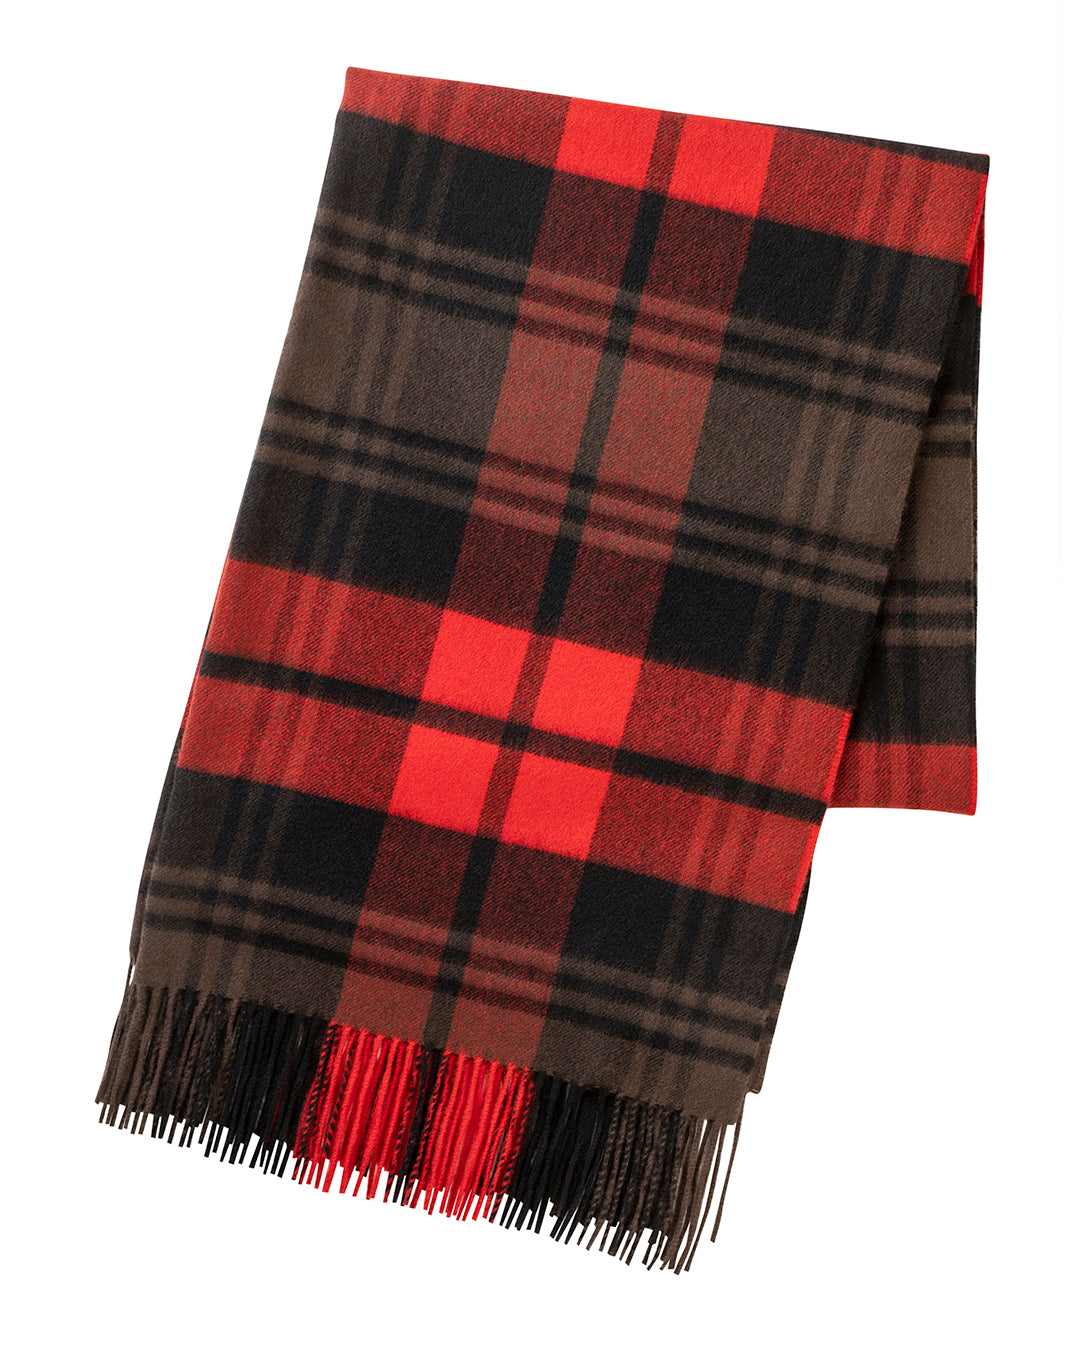 Joshua Ellis | Luxury Cashmere Primary Check Stole | Made in England